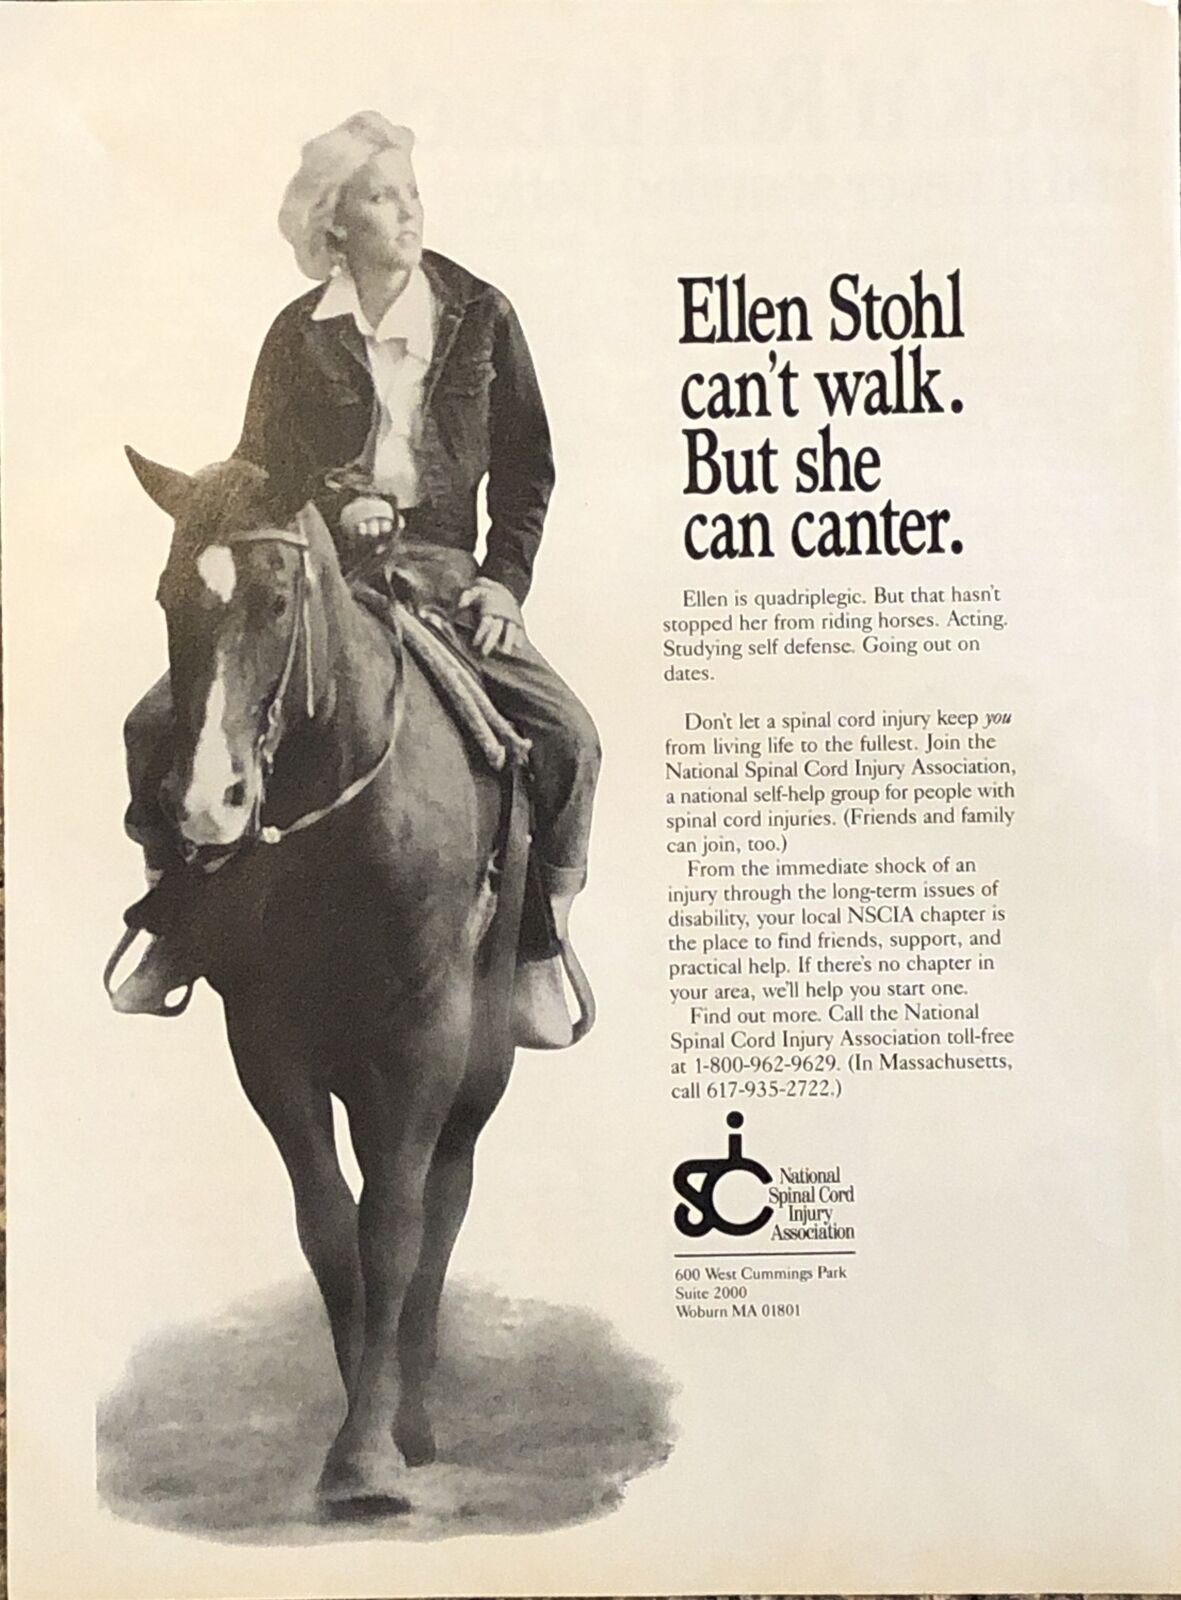 PRINT AD 1989 National Spinal Cord Injury Association Ellen Stohl Horse Canter